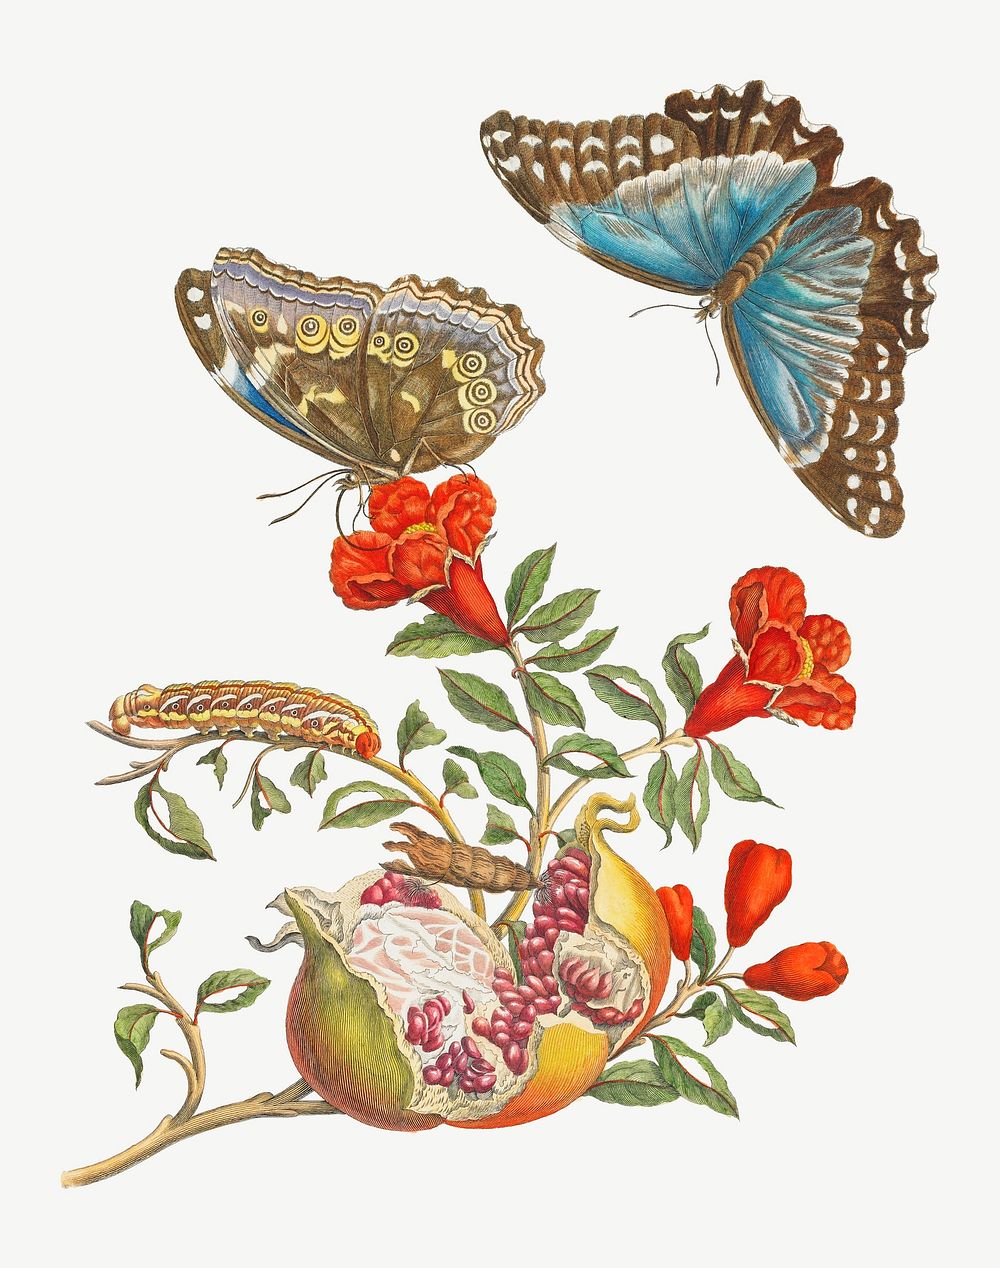 Blue Butterflies and Pomegranate, vintage botanical illustration by Maria Sibylla Merian psd. Remixed by rawpixel.